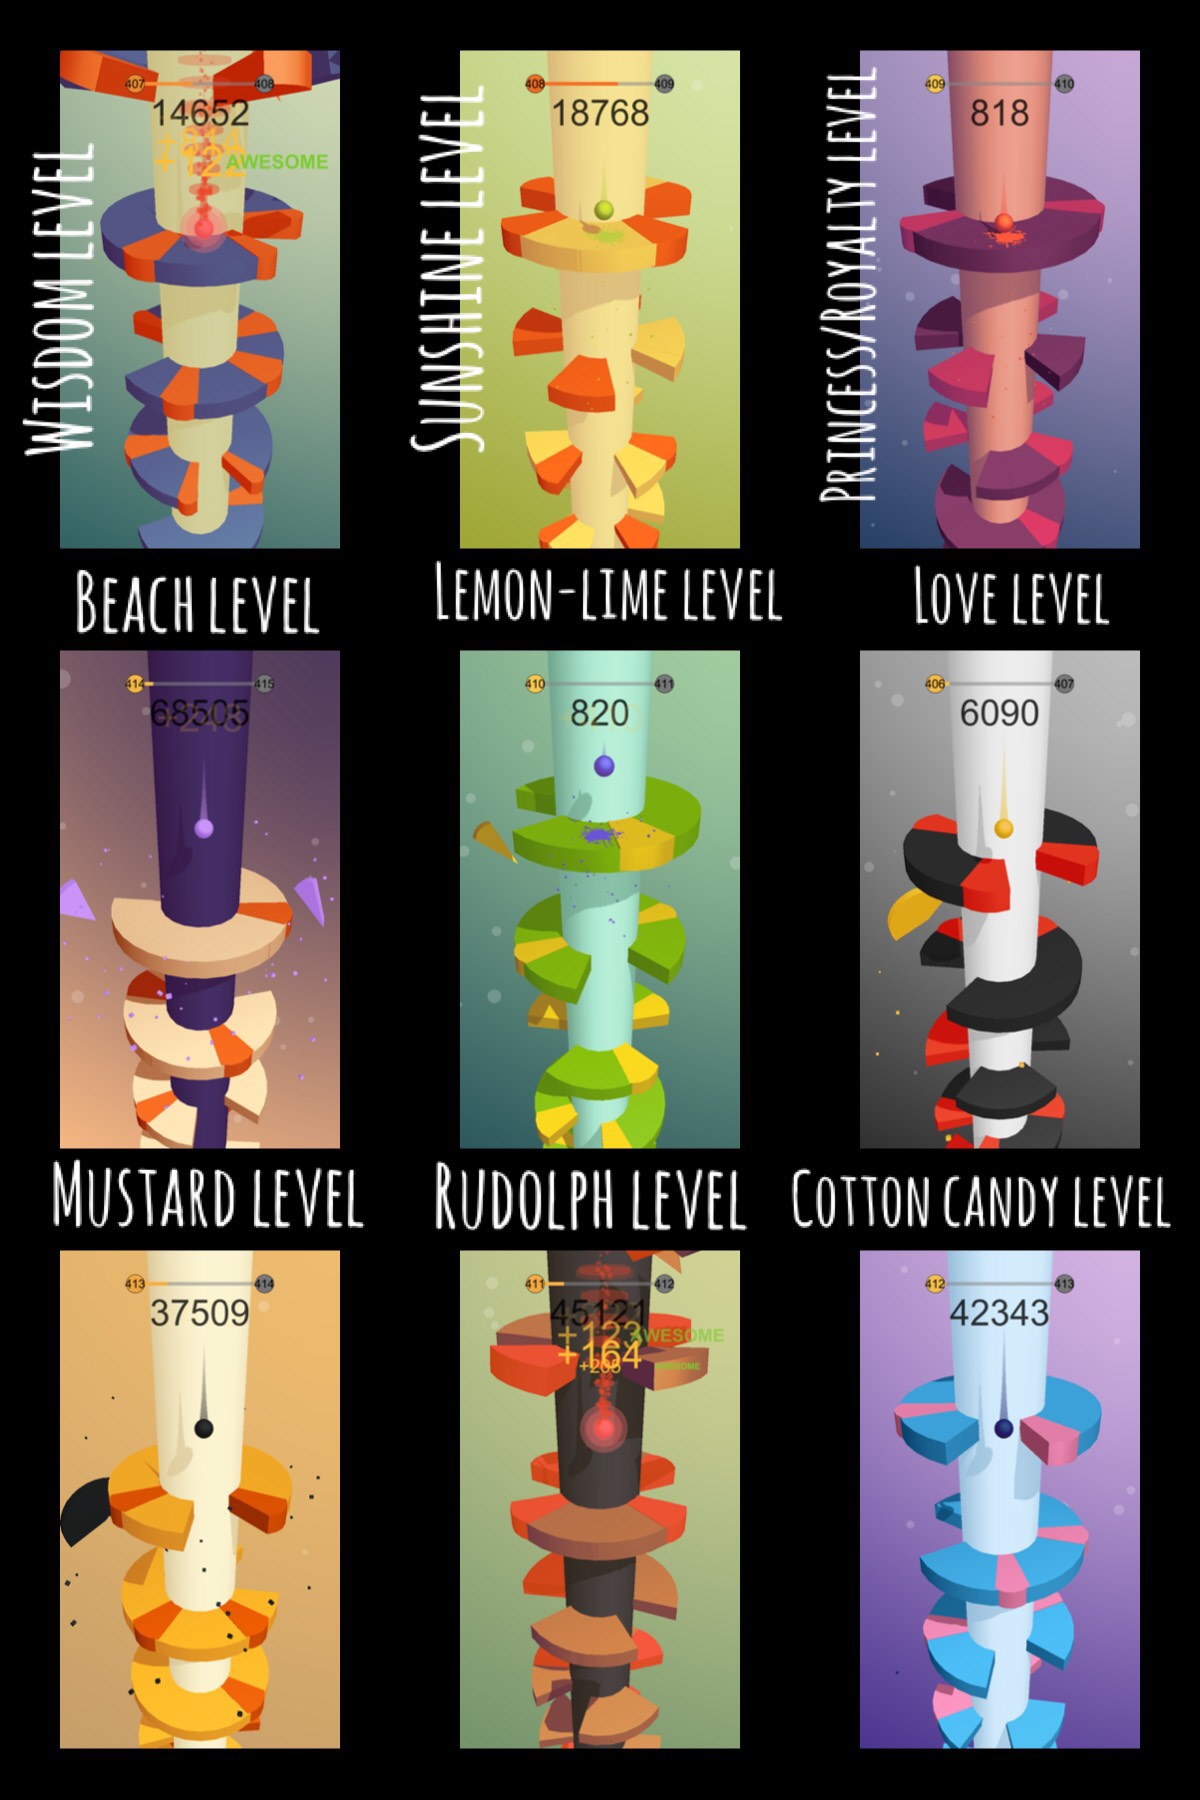 I’m addicted to this game, and created a name for each level!